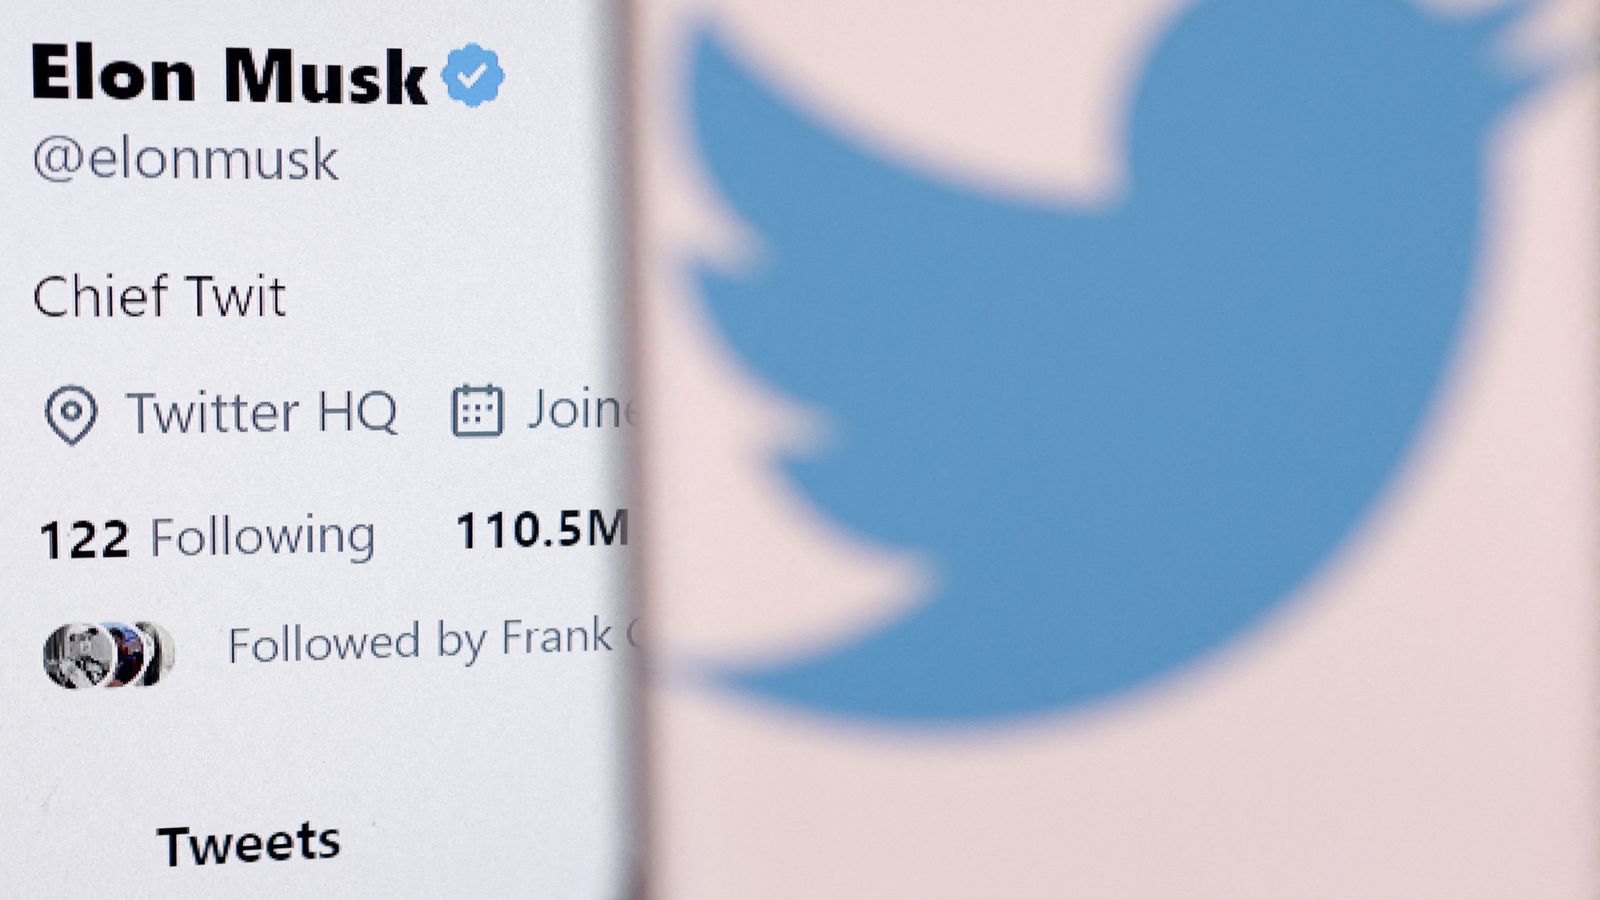 Elon Musk tweets - then deletes - link to article with unfounded theory about Paul Pelosi attack